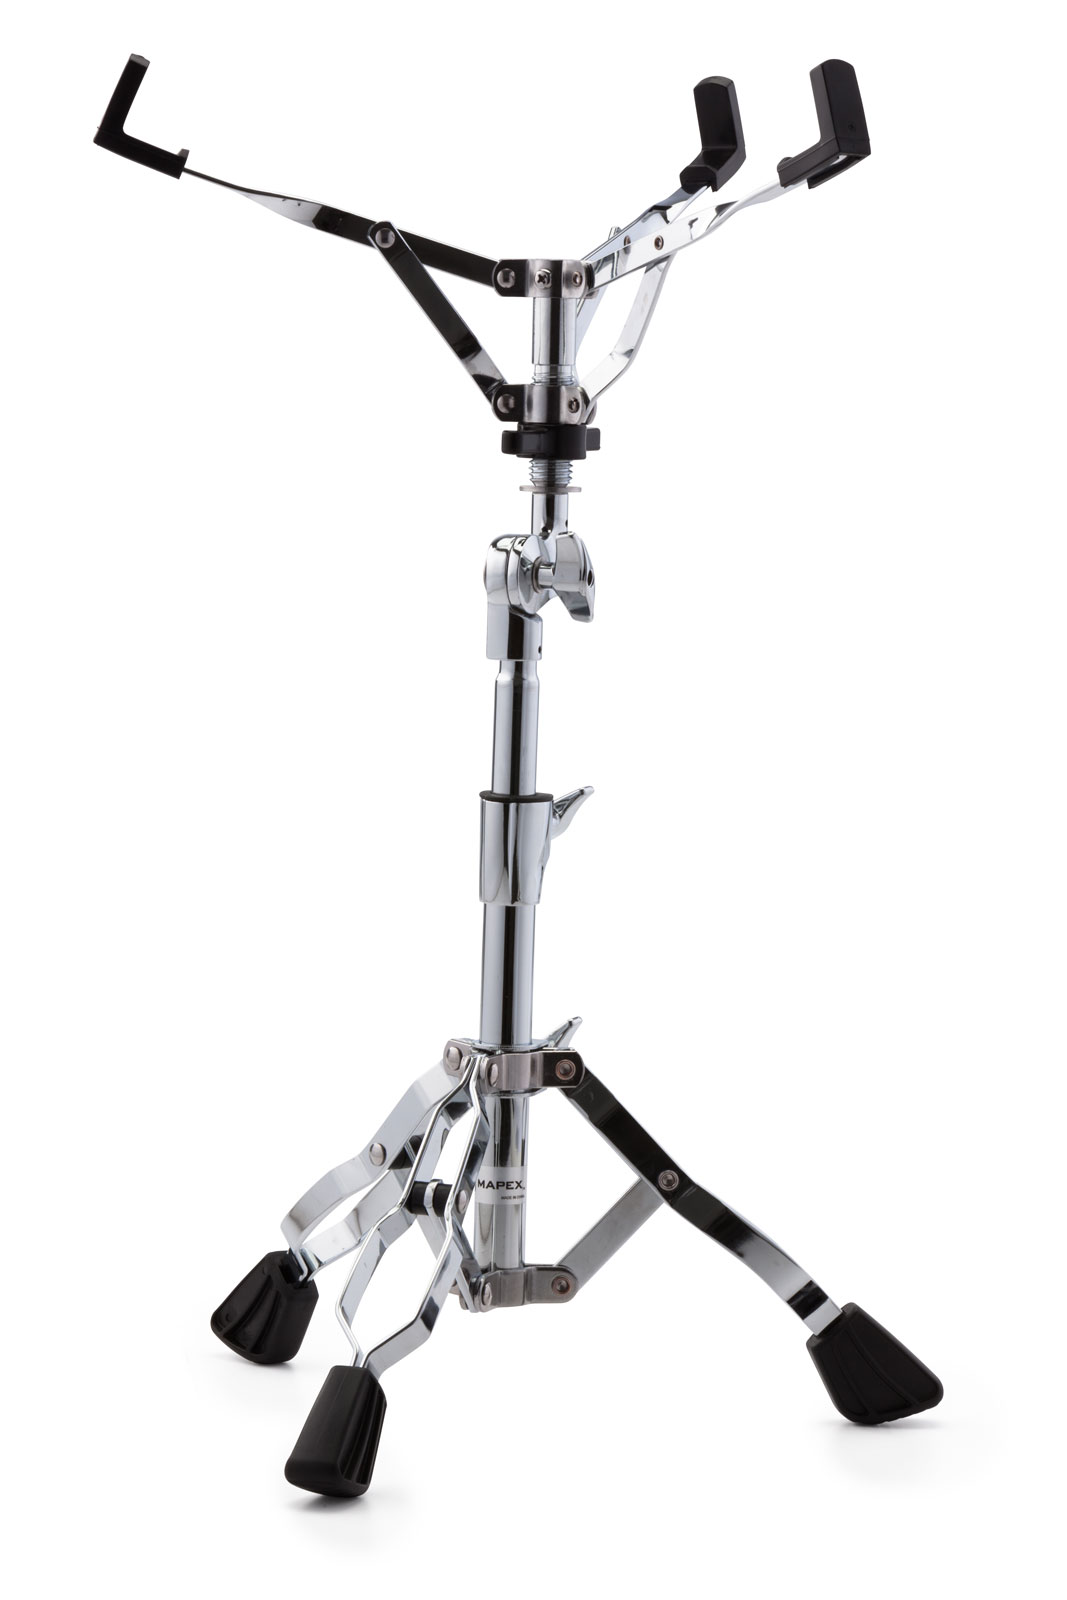 MAPEX S400 - STORM SNARE DRUM STAND